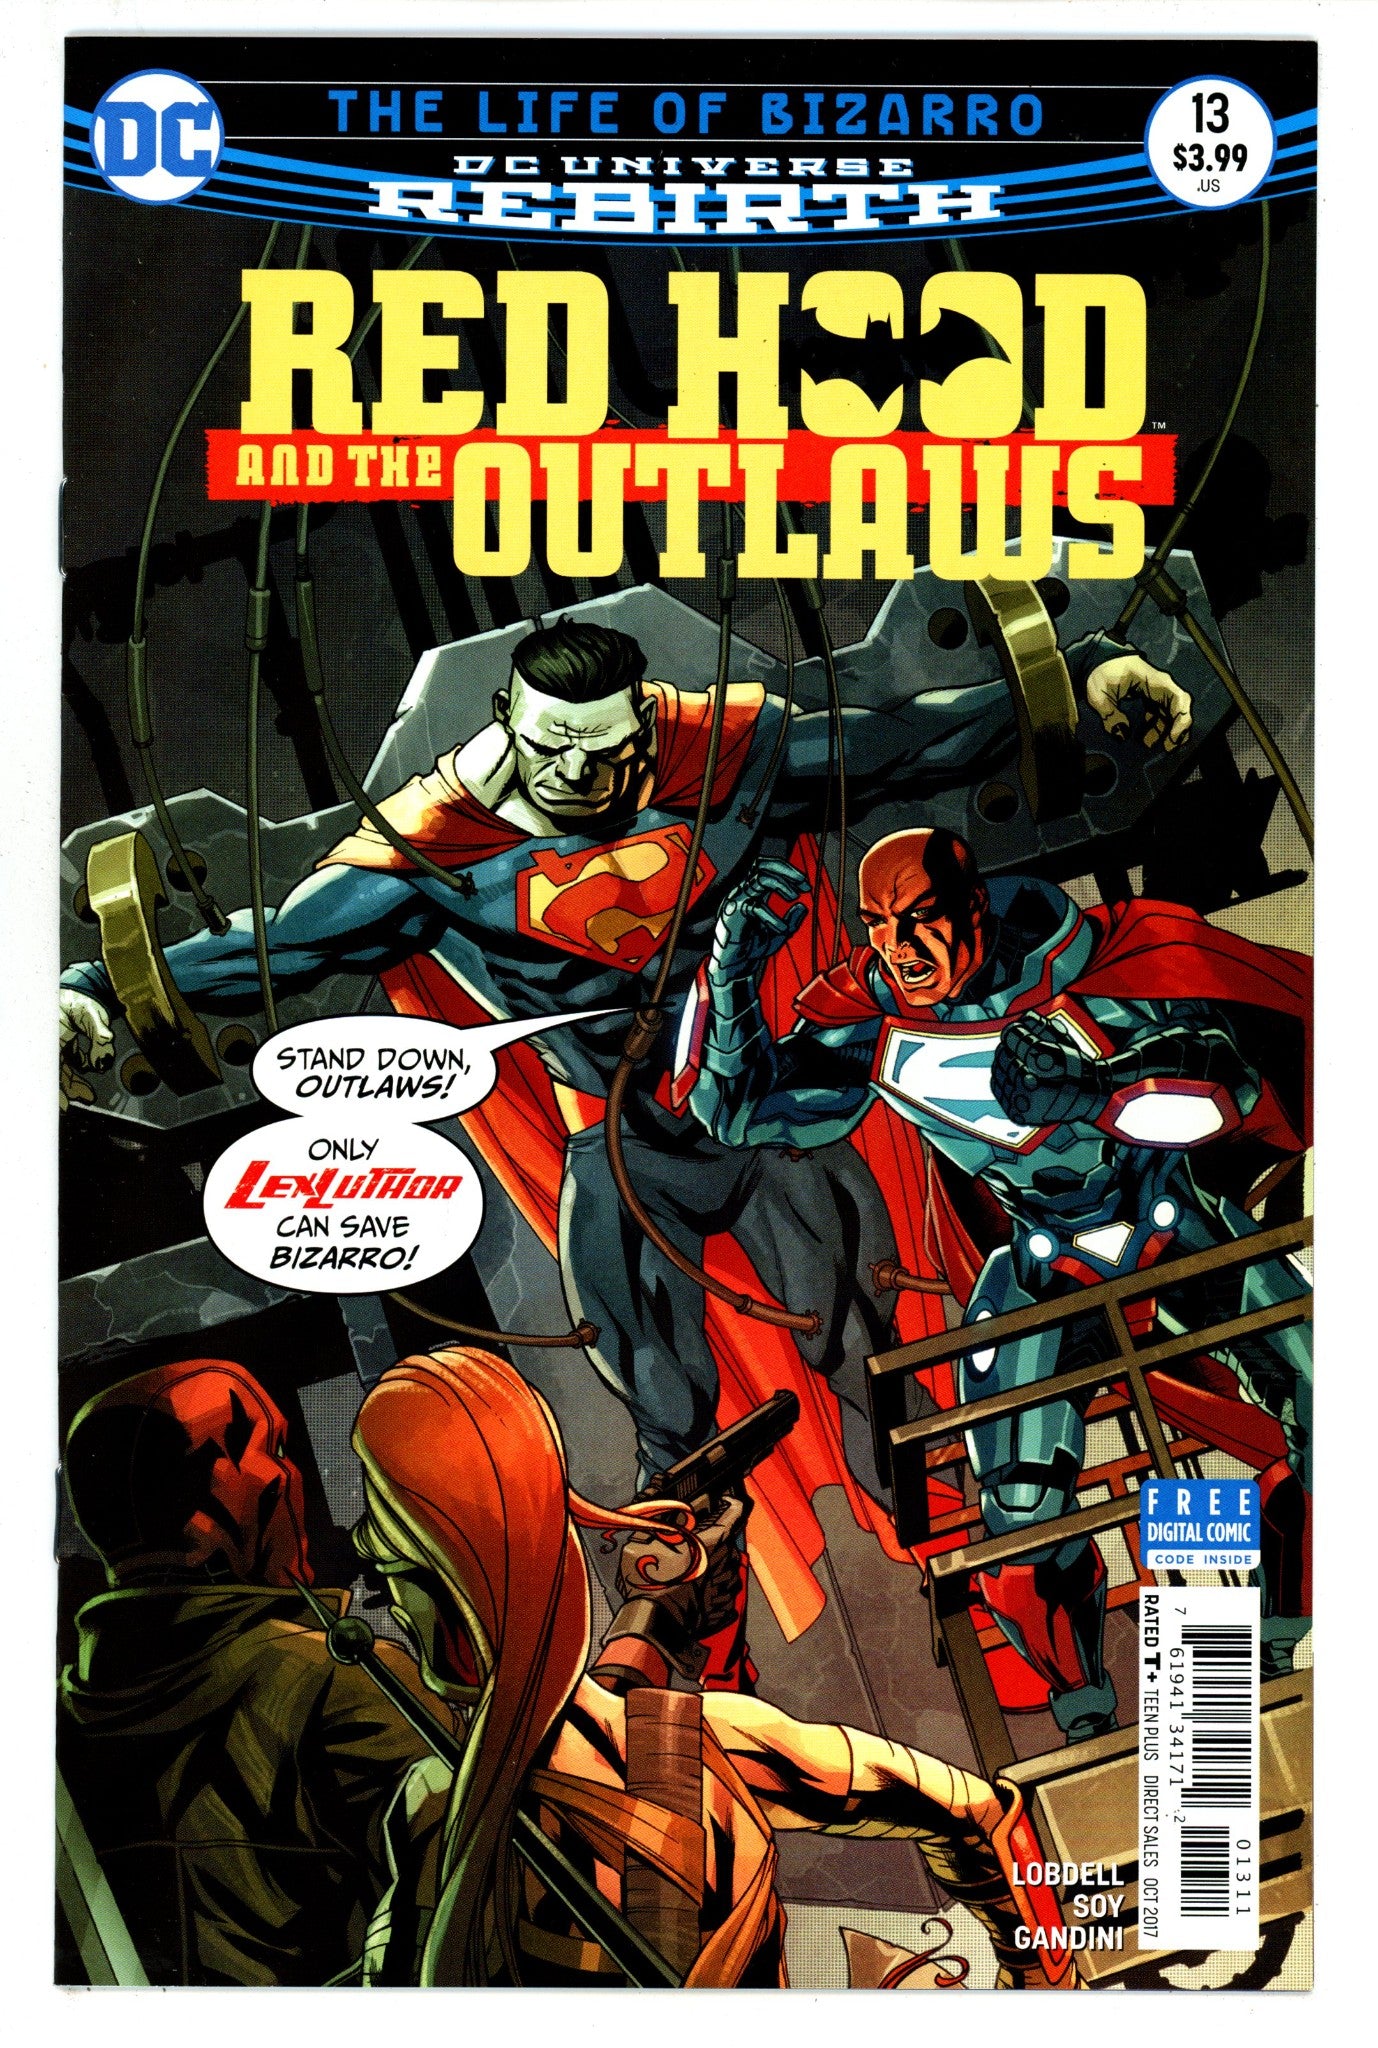 Red Hood and the Outlaws Vol 2 13 High Grade (2017) 